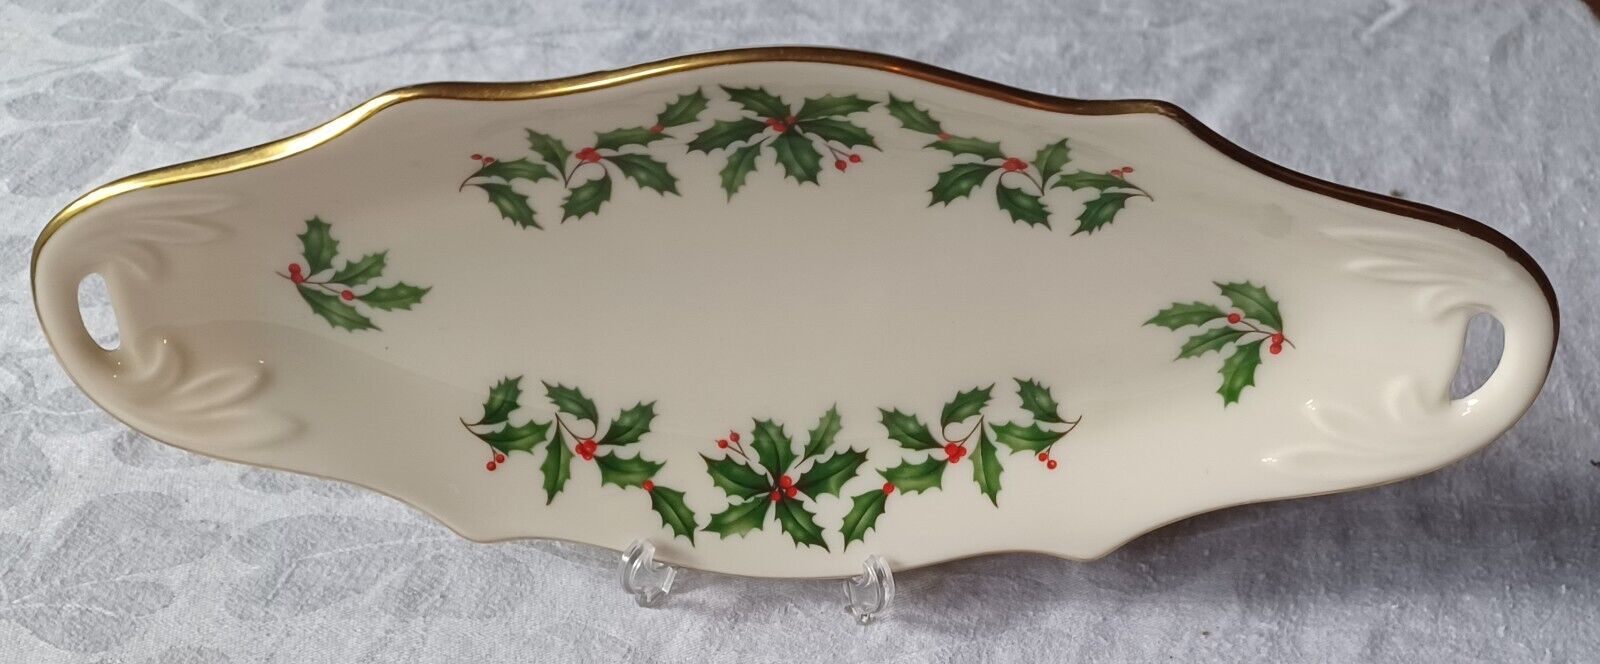 Lenox Holiday Condiment Tray Plate Relish Dish  Christmas Holly Berry  24K Gold 